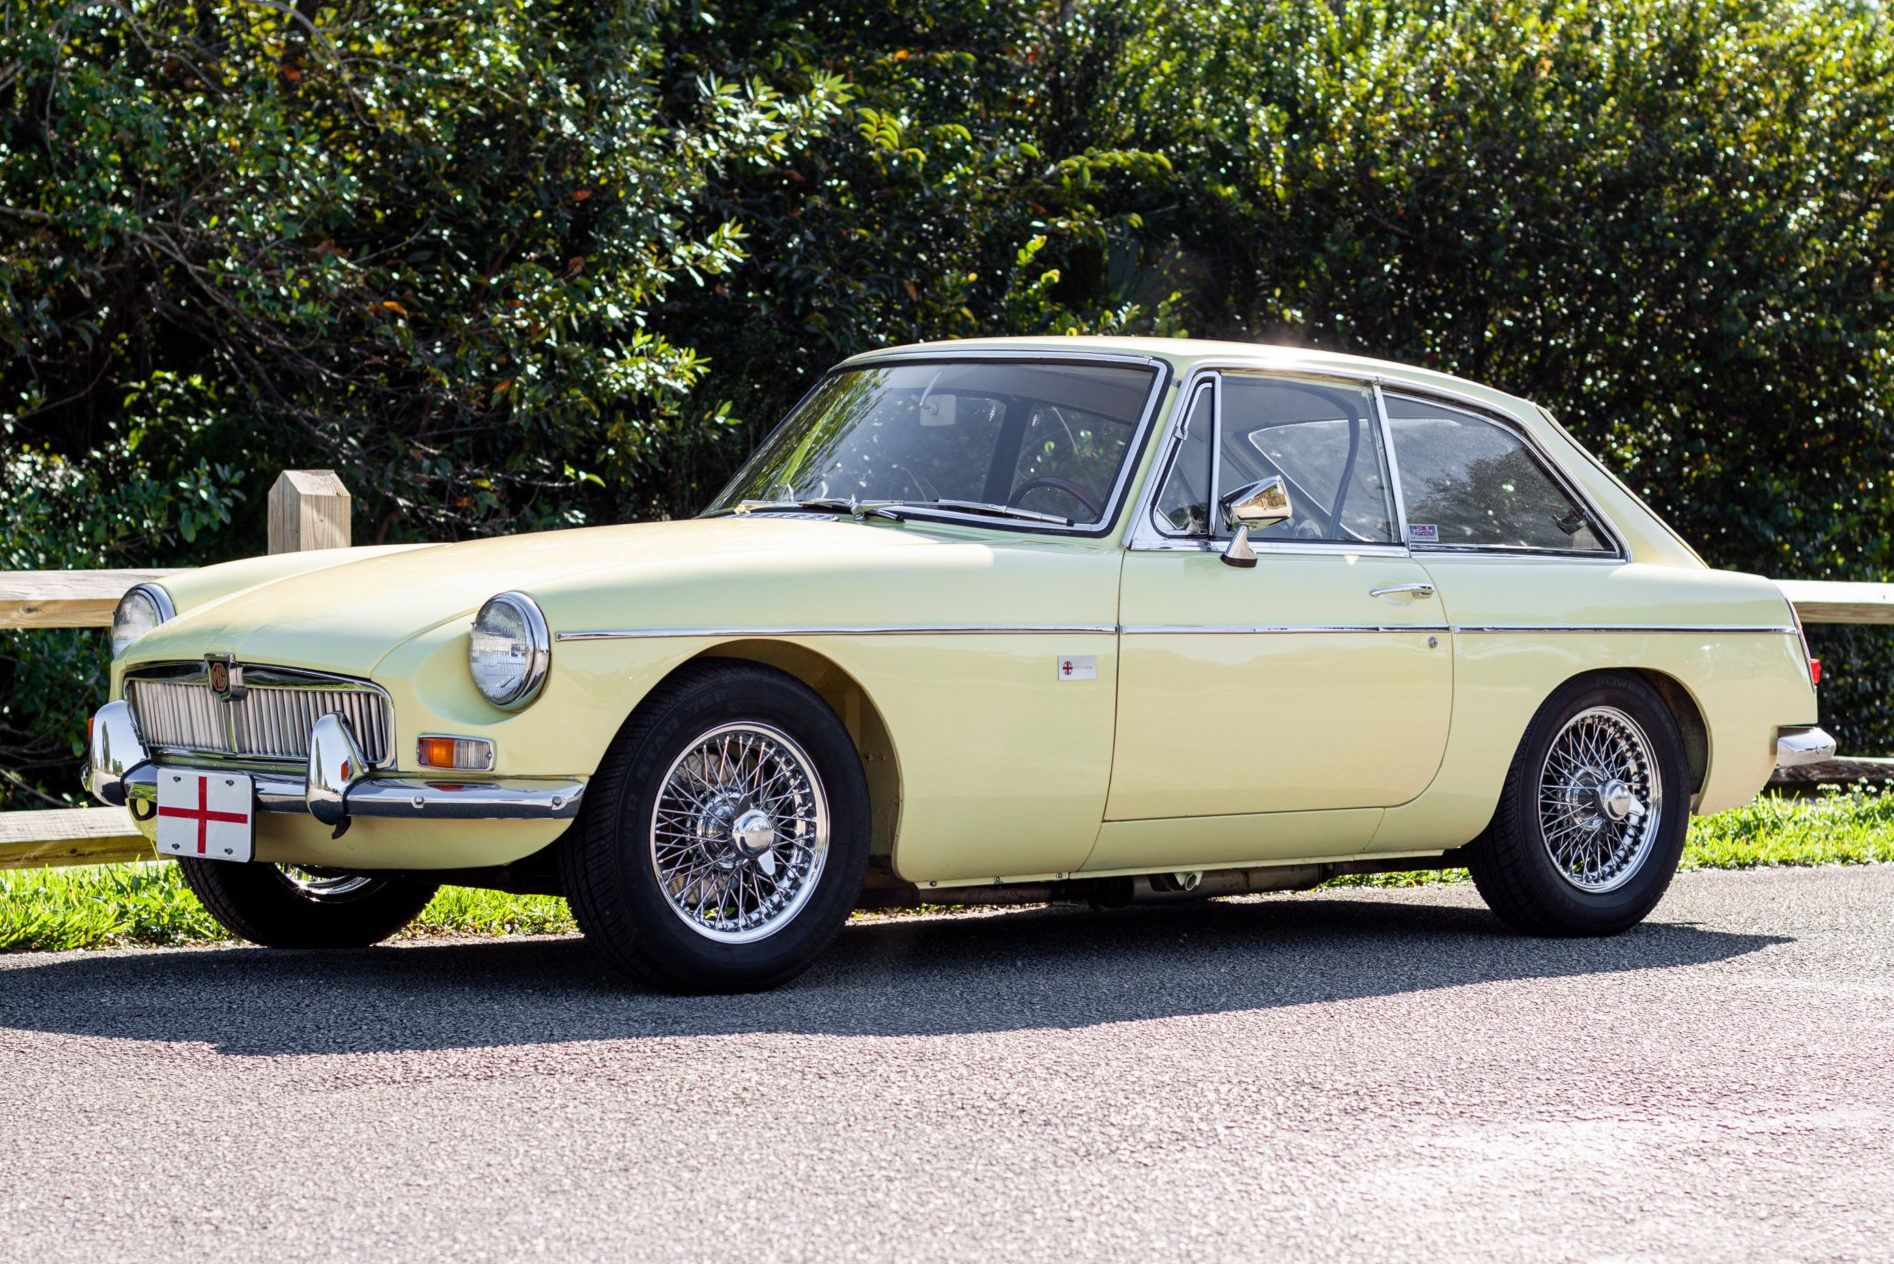 Pale Yellow MGB GT parked at the side of the road on a sunny day